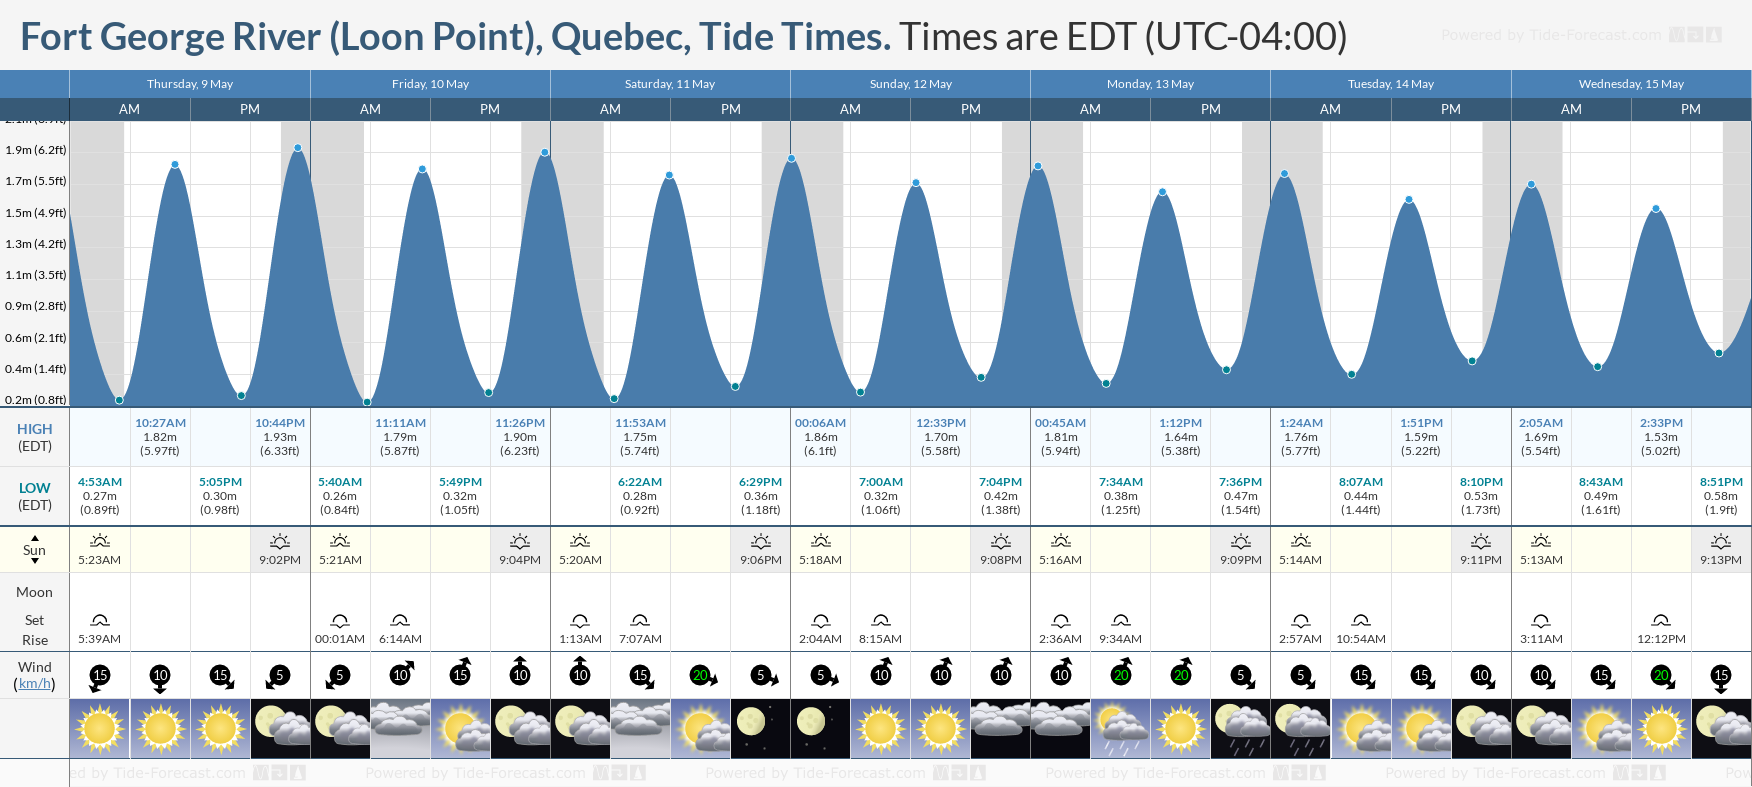 Fort George River (Loon Point), Quebec Tide Chart including high and low tide tide times for the next 7 days